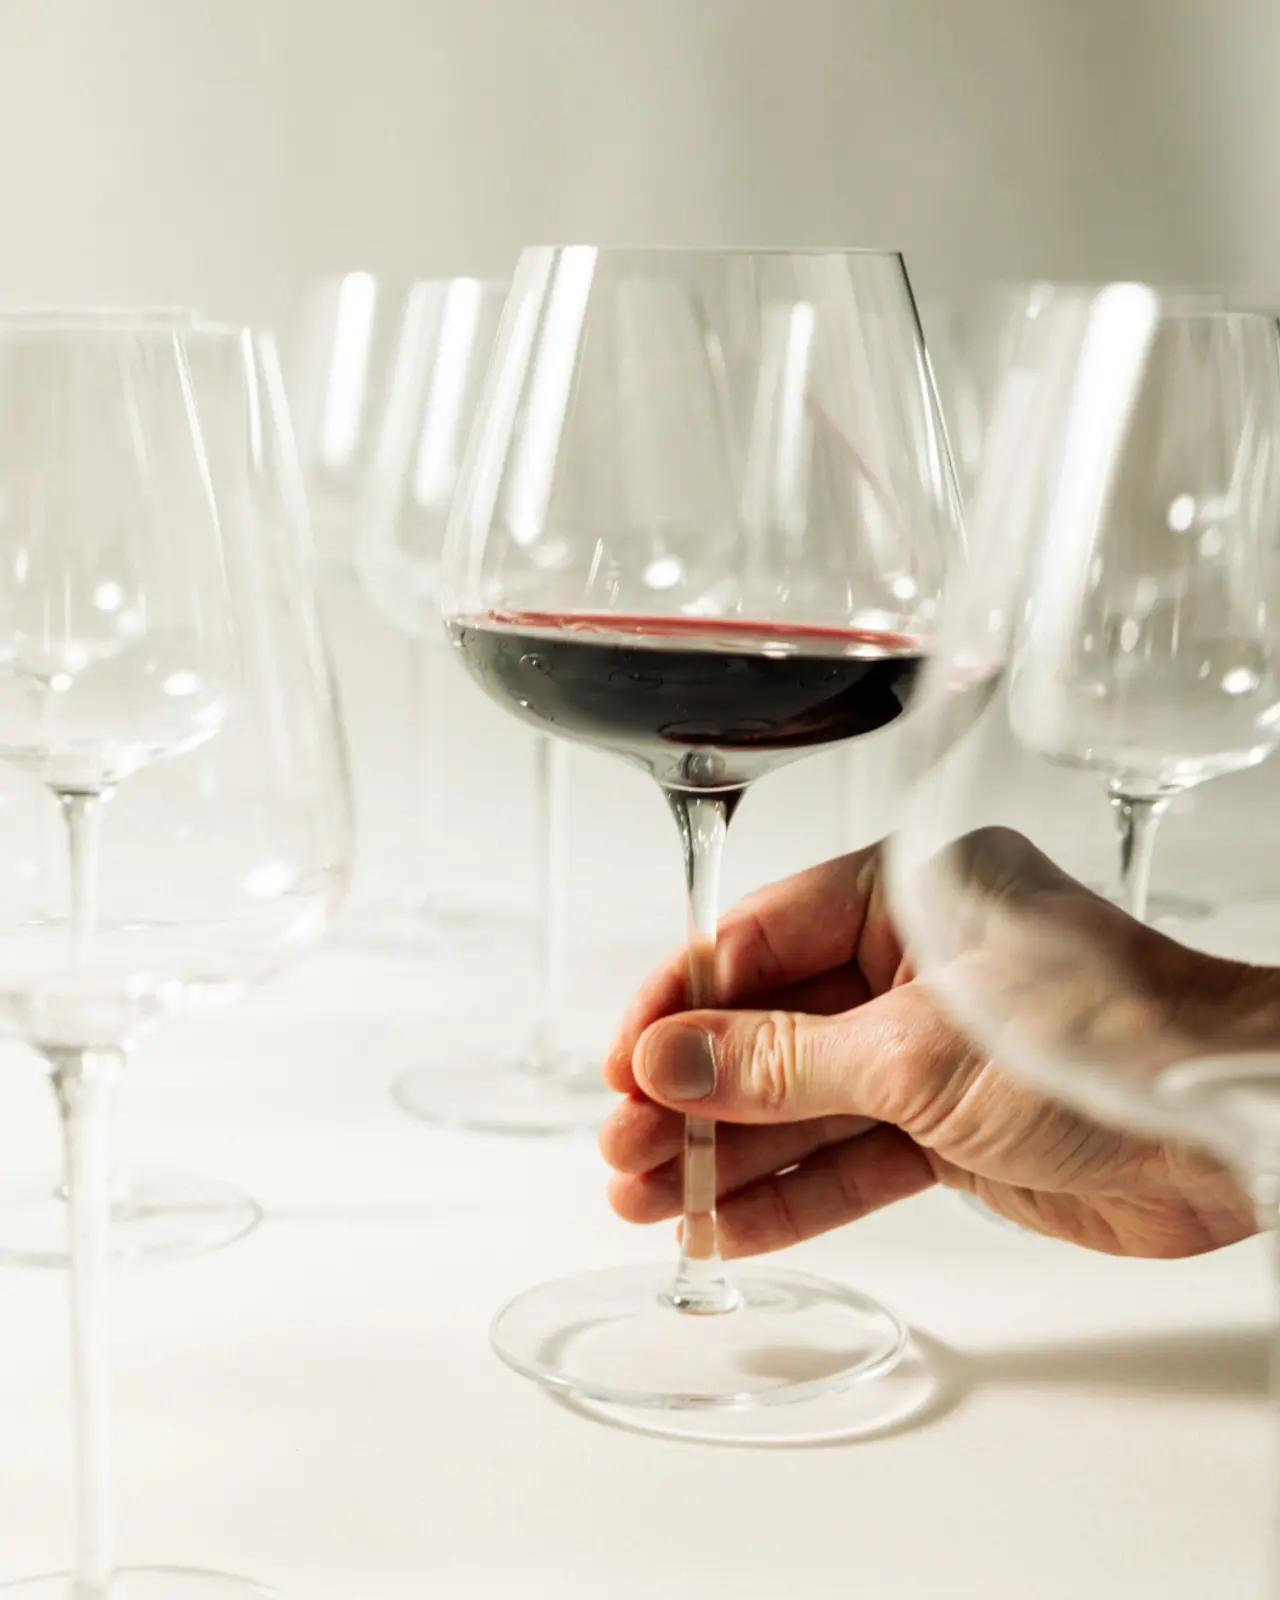 A hand holds a stem of a wine glass filled with red wine amidst several empty glasses on a white background.